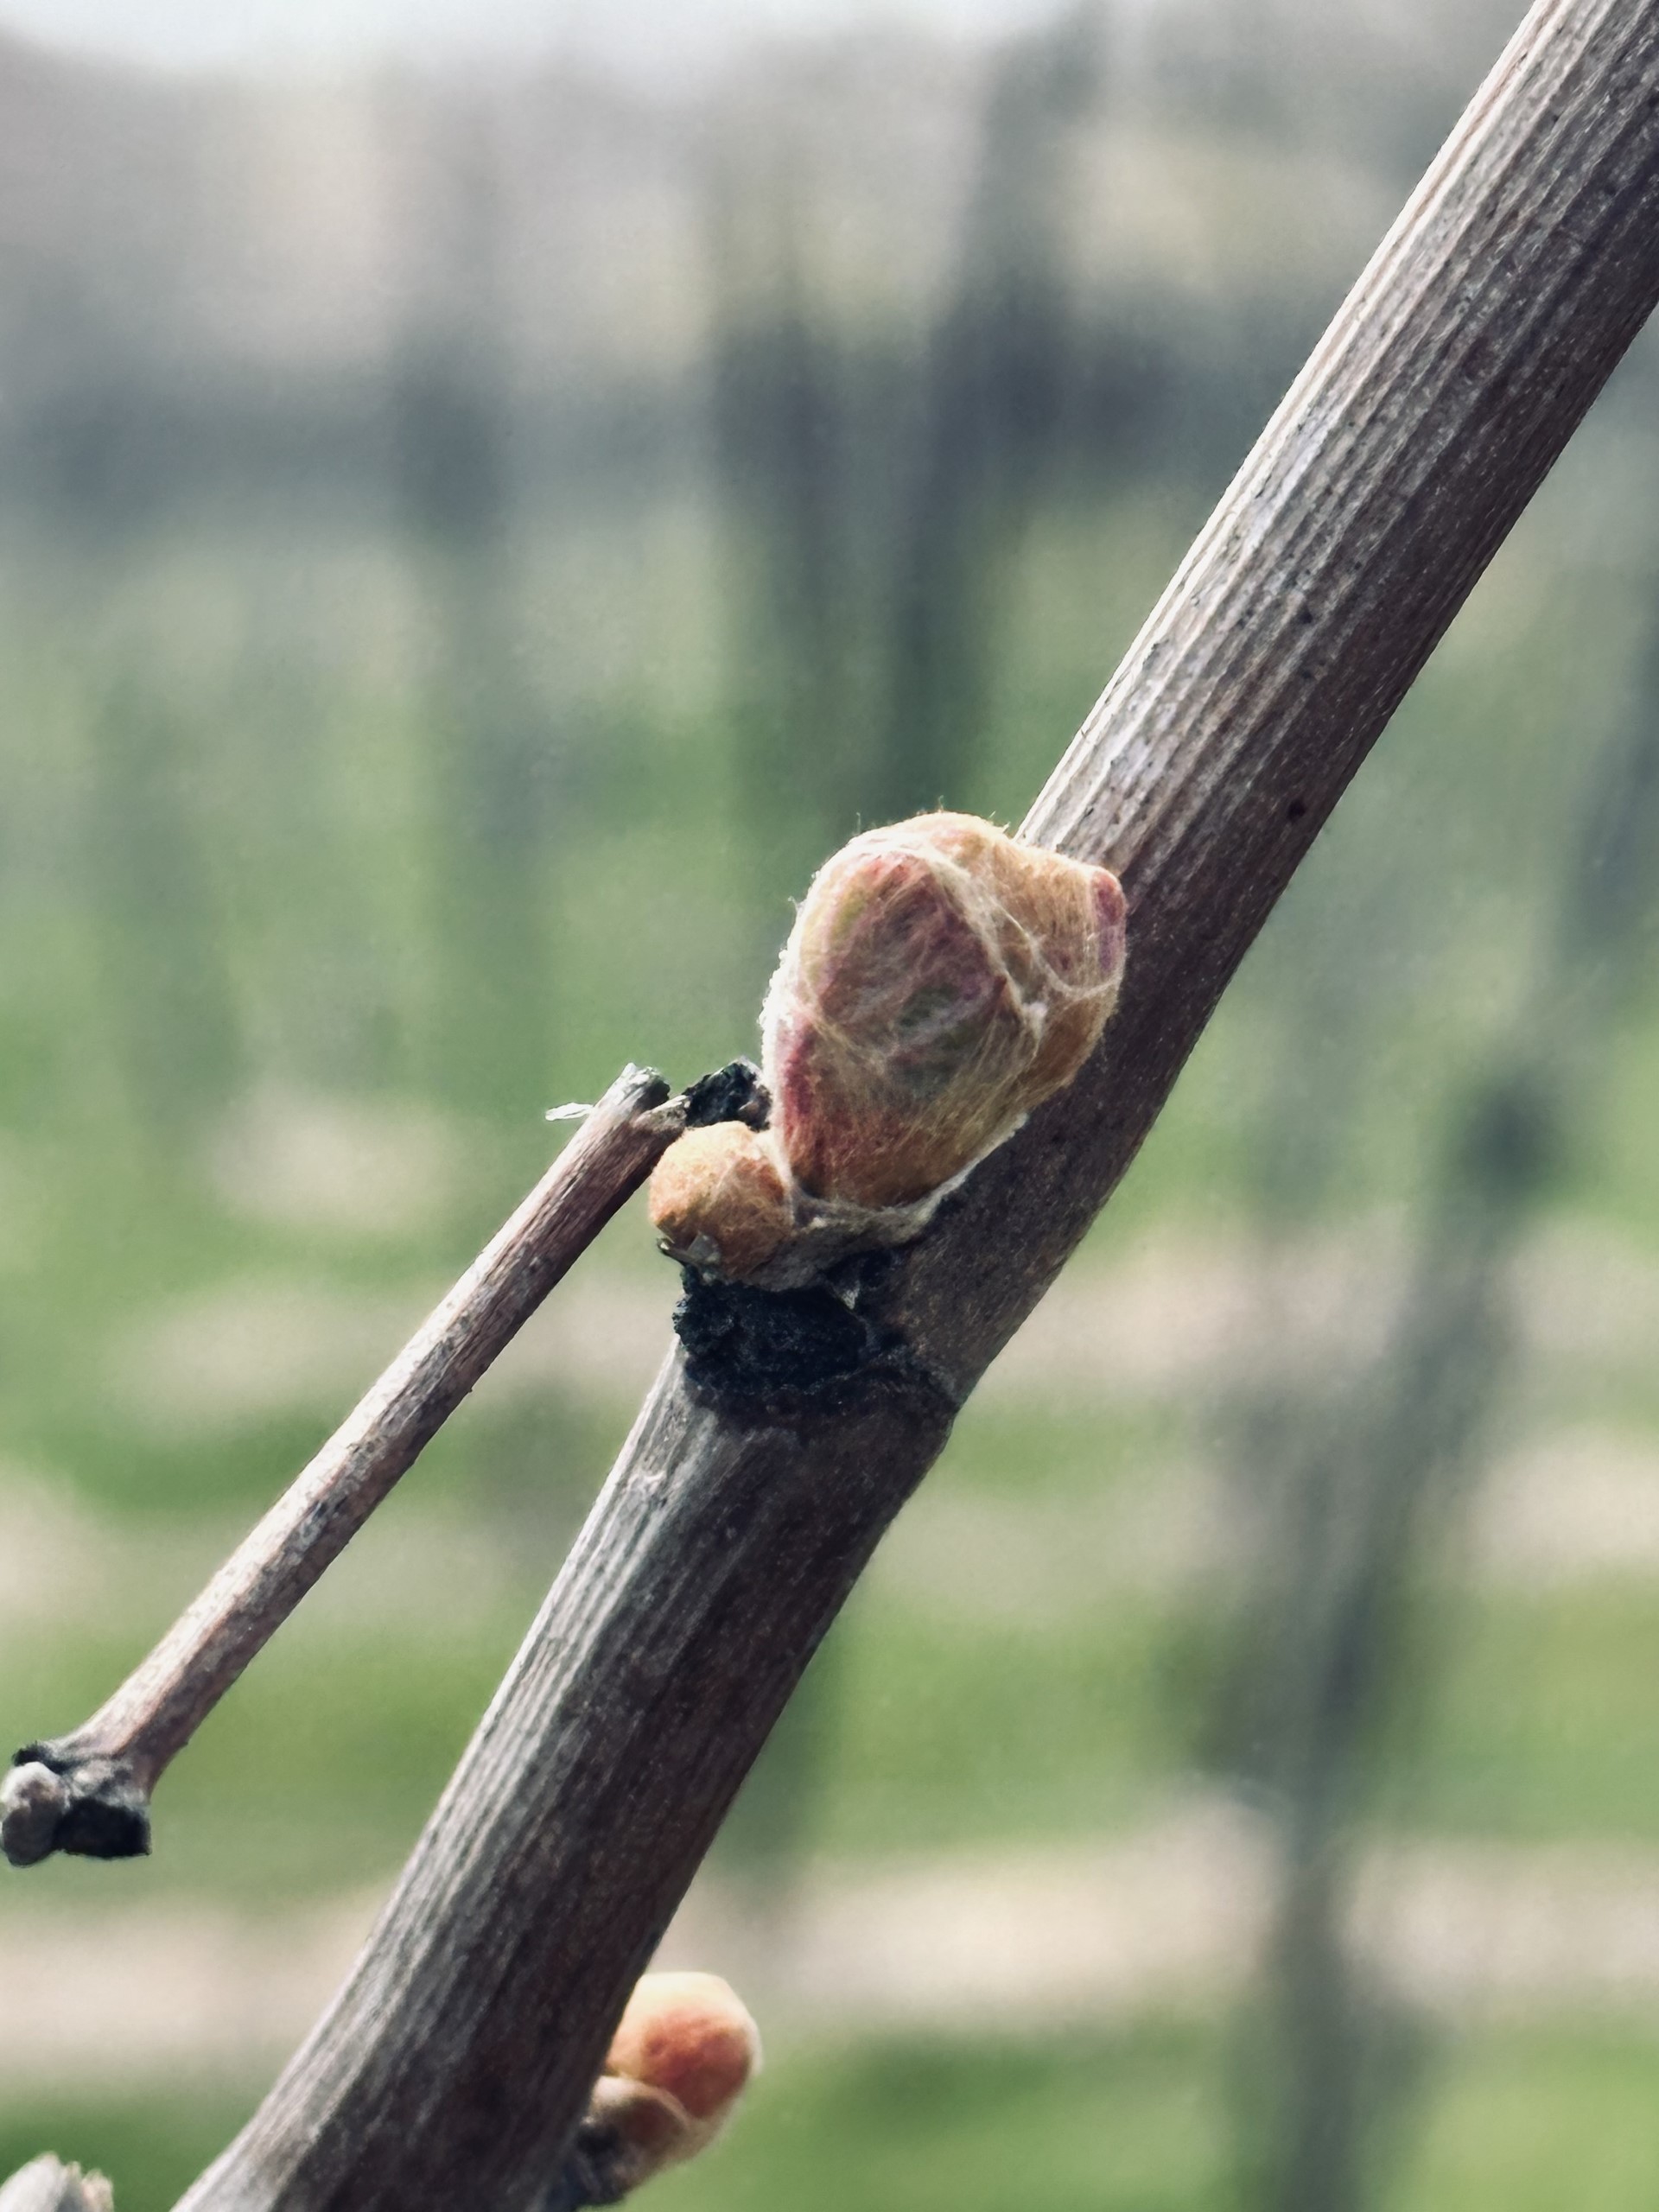 A grape bud and branch.